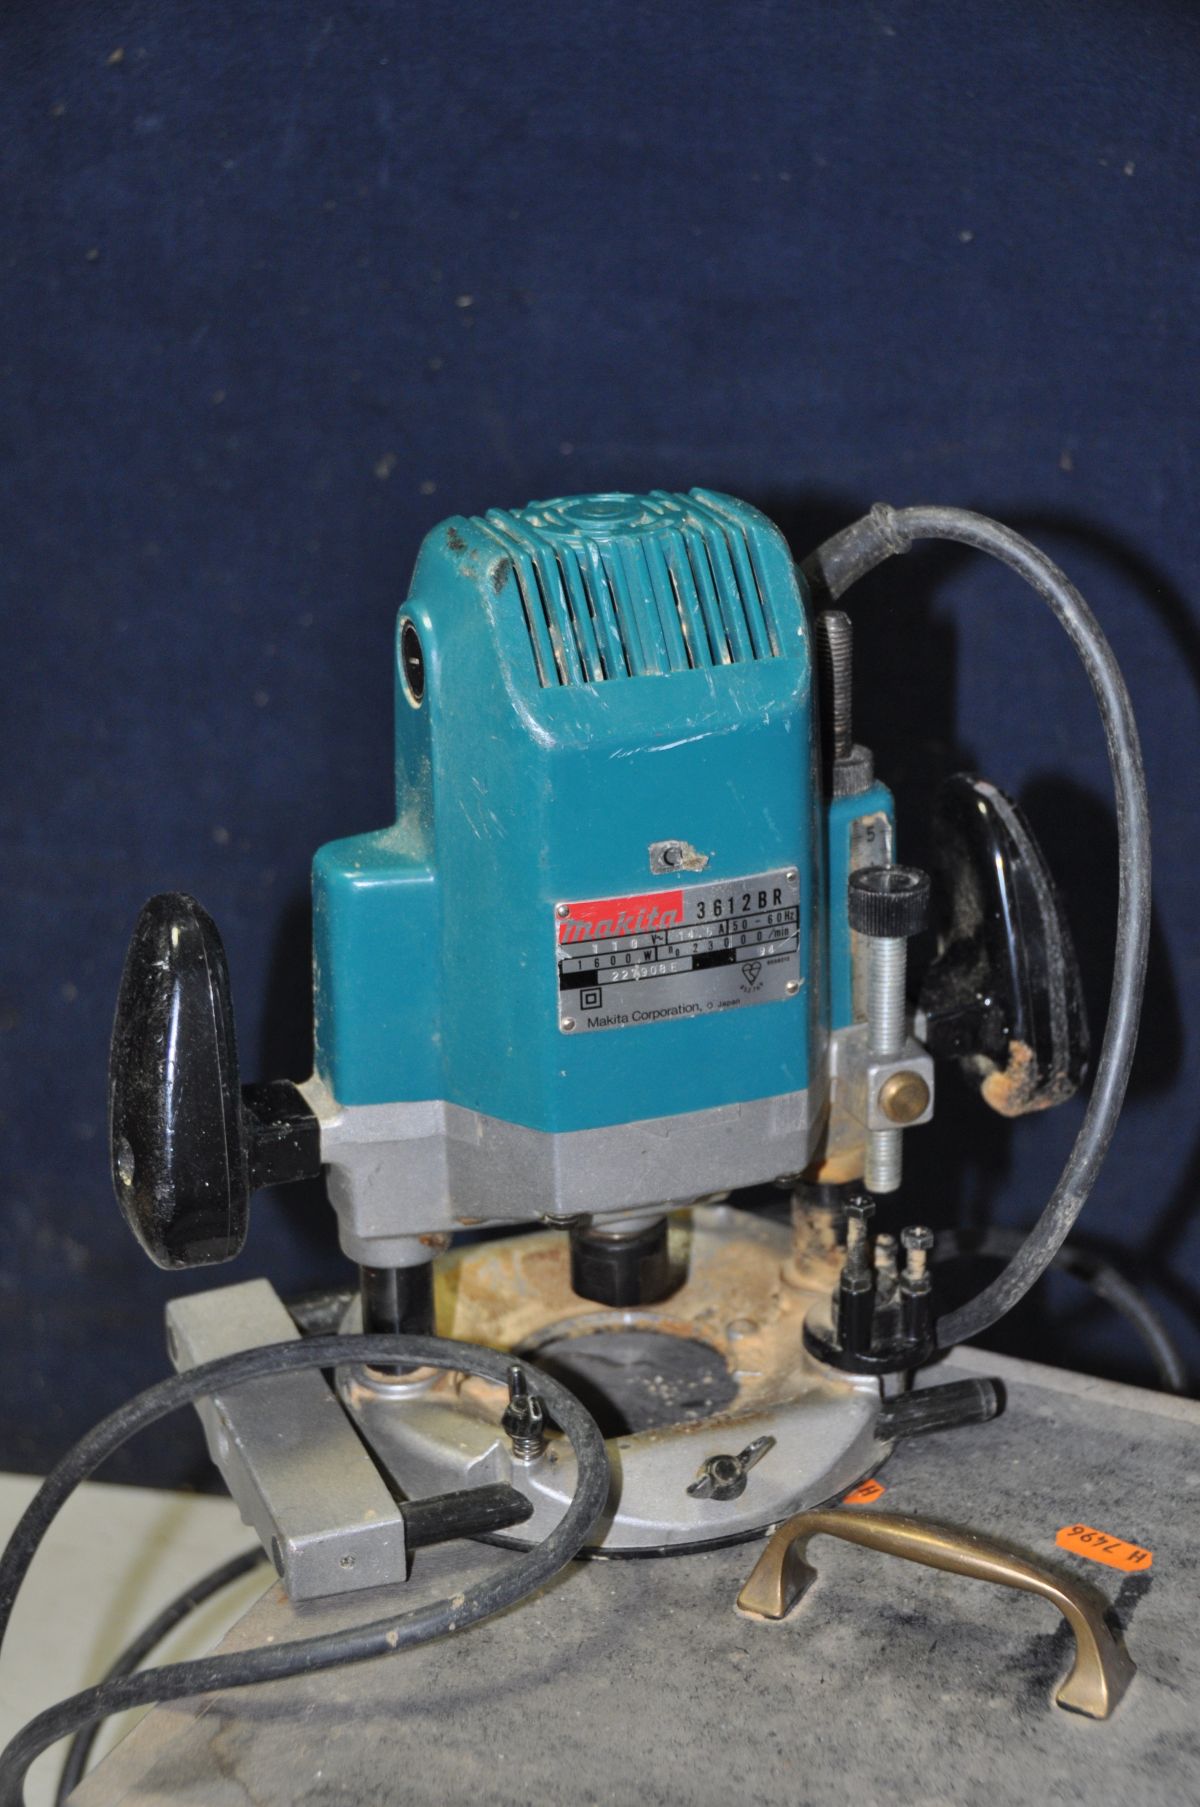 A MAKITA 3612BR PLUNGE ROUTER (UNTESTED due to plug type)